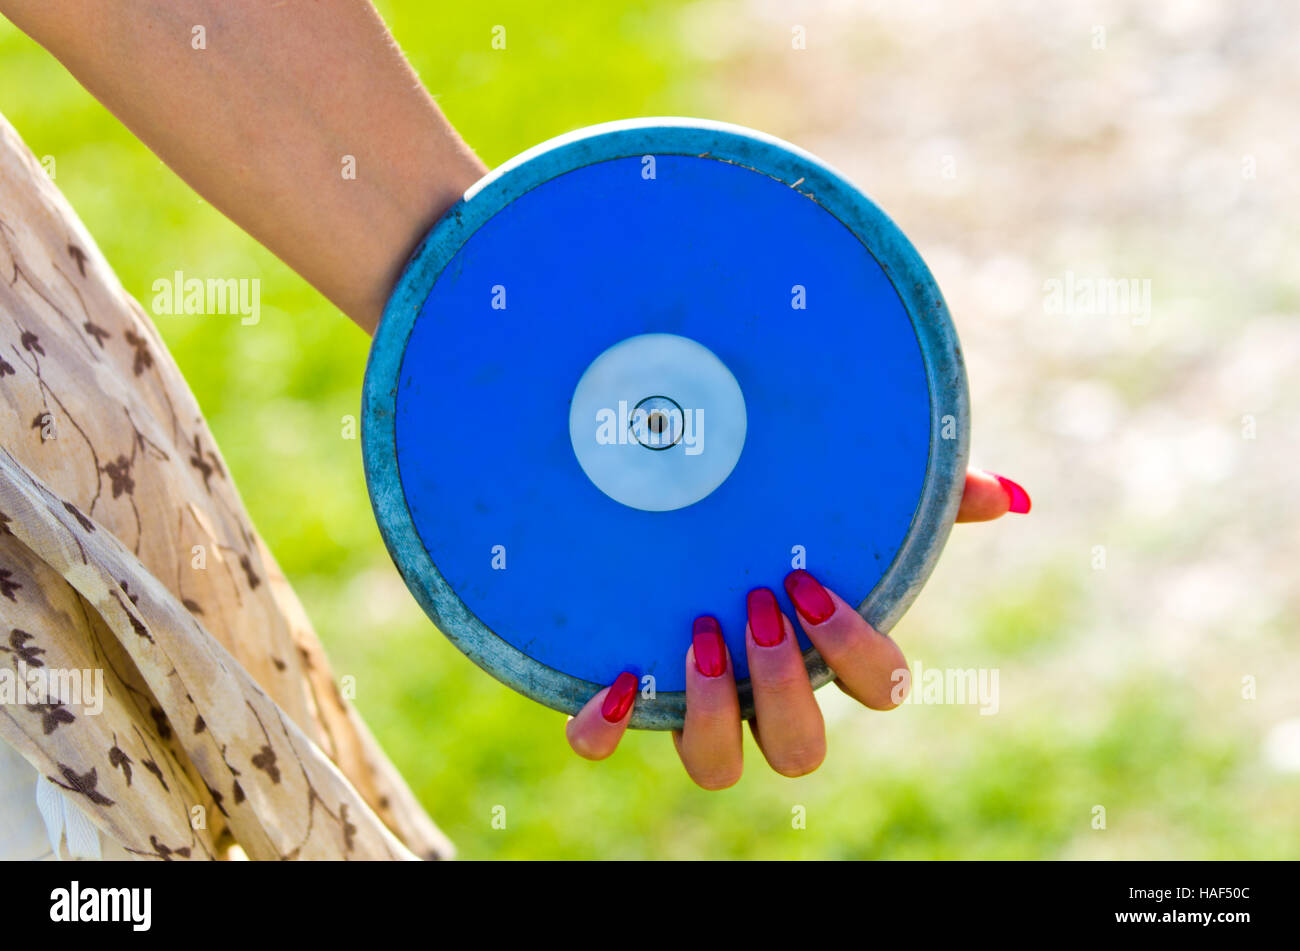 blue disc close to a hand with red fingernails ready to be launched Stock Photo